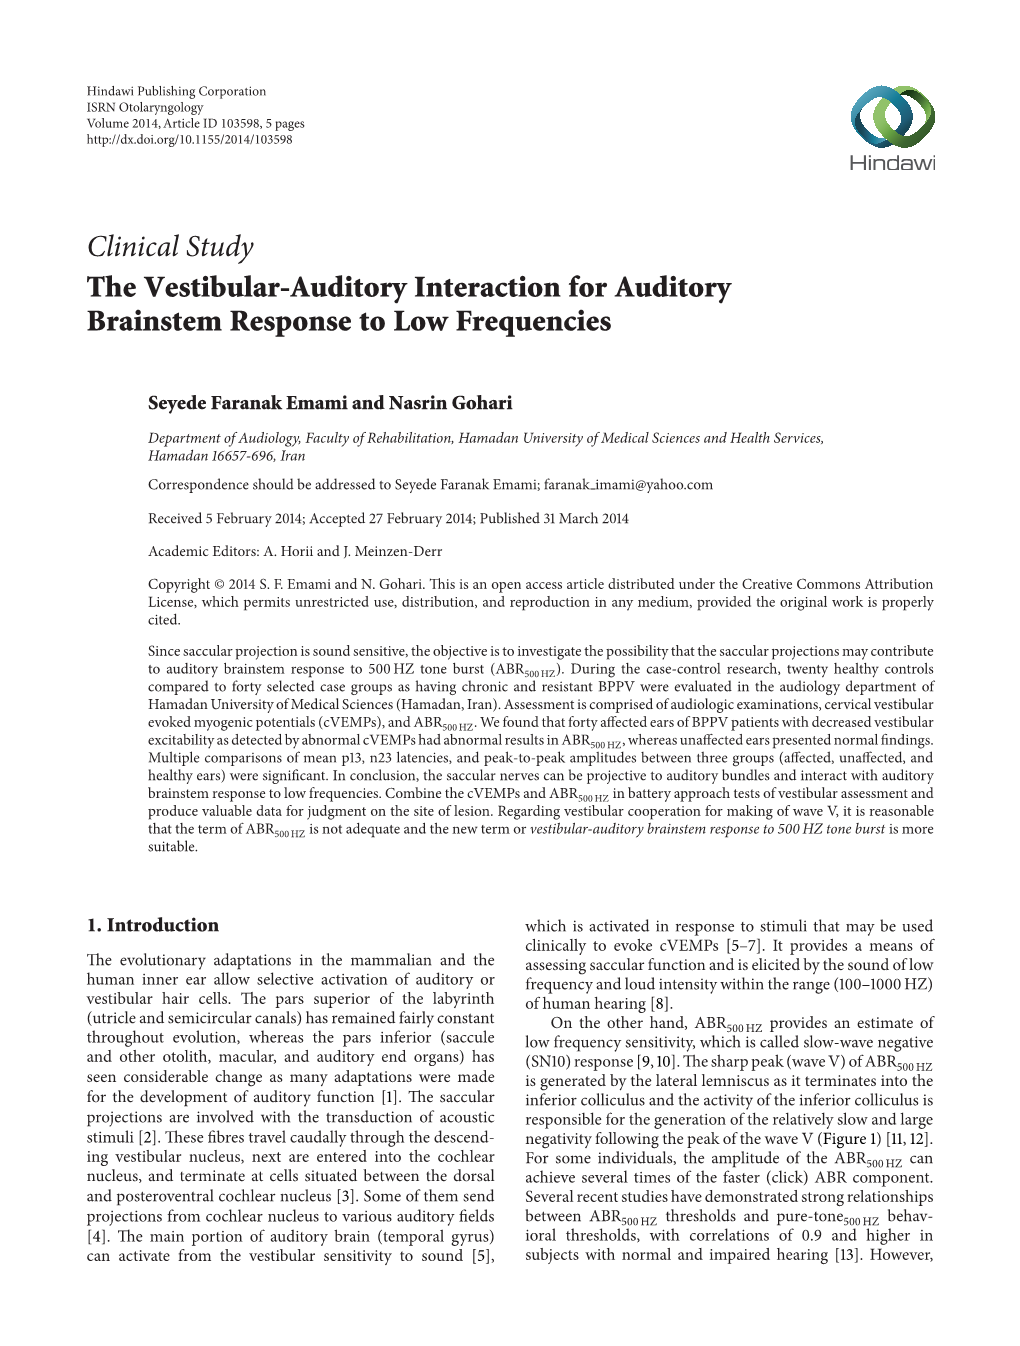 The Vestibular-Auditory Interaction for Auditory Brainstem Response to Low Frequencies